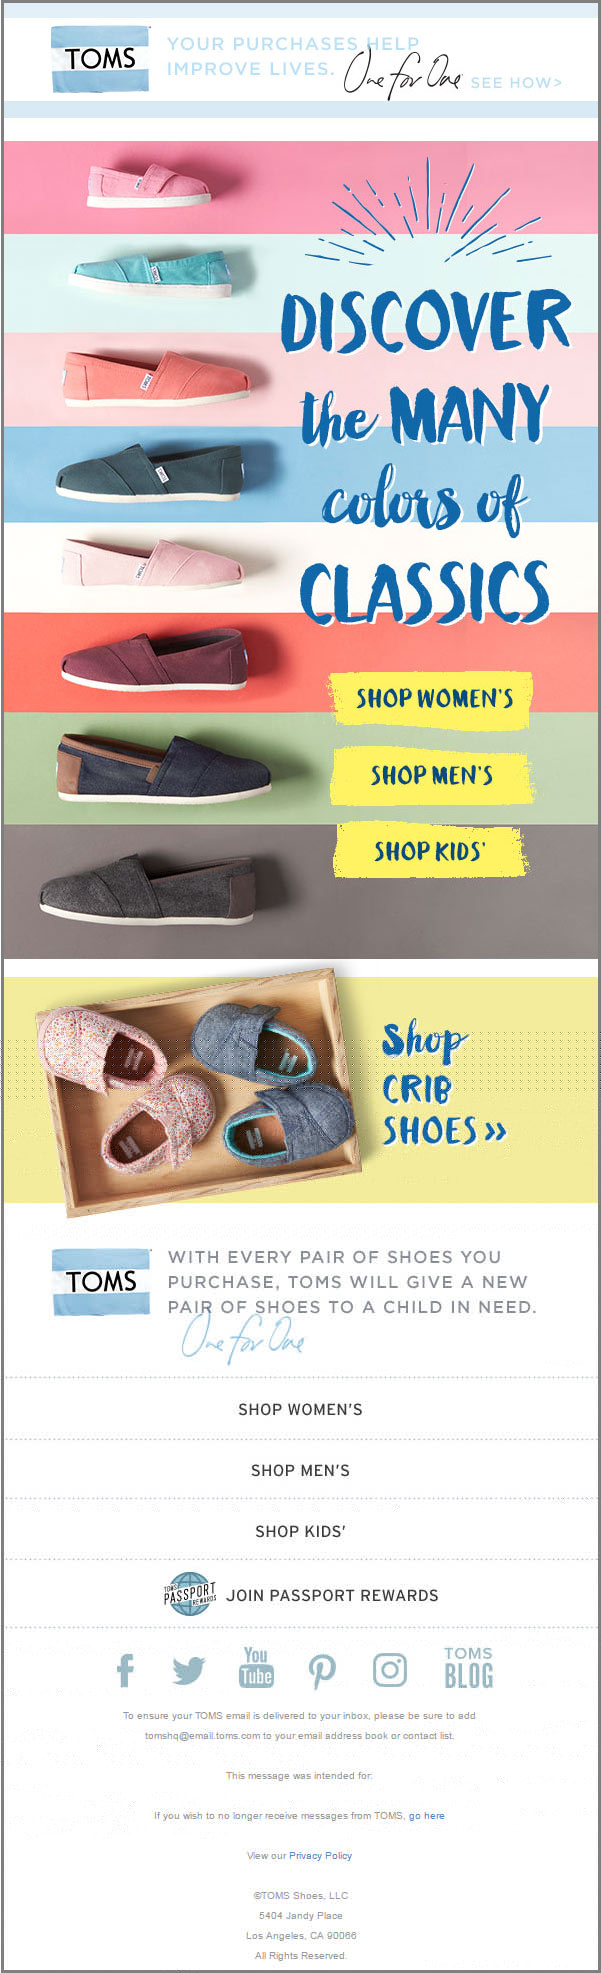 Designing for email-Toms